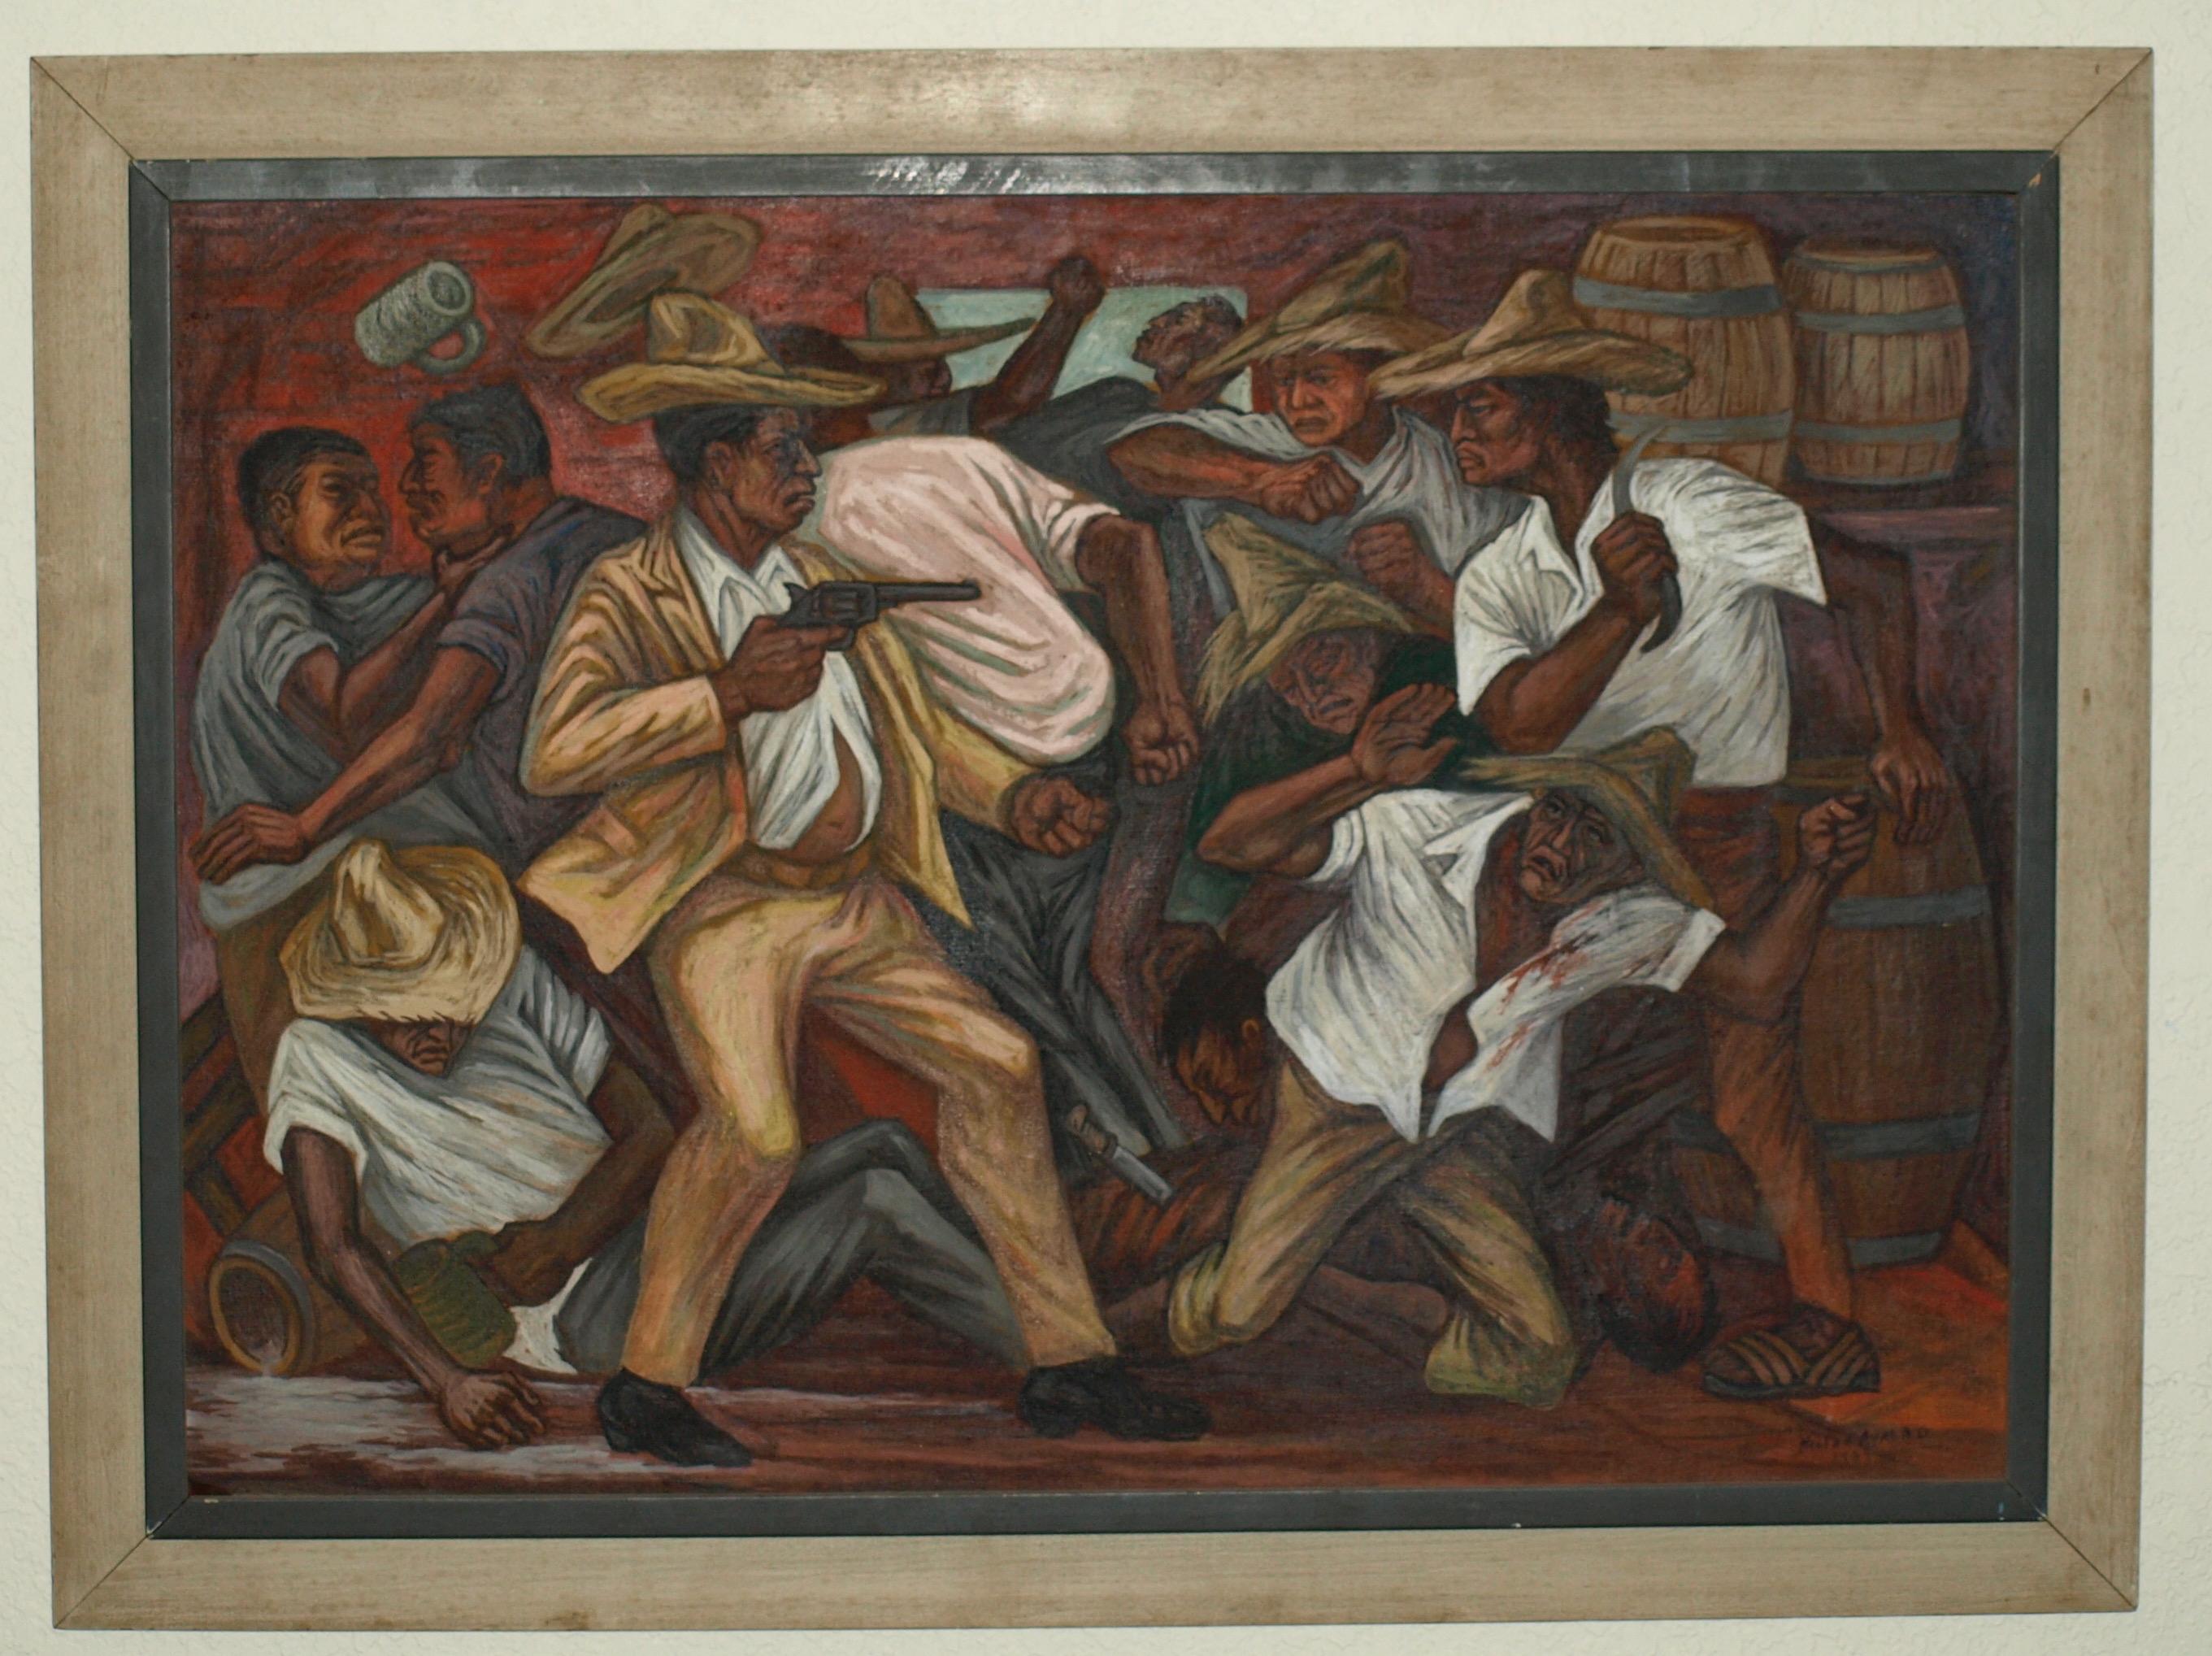 Rowdy Mexican Cantina Brawl with Beer, Men, Guns & Knives - Painting by Hector Ayala